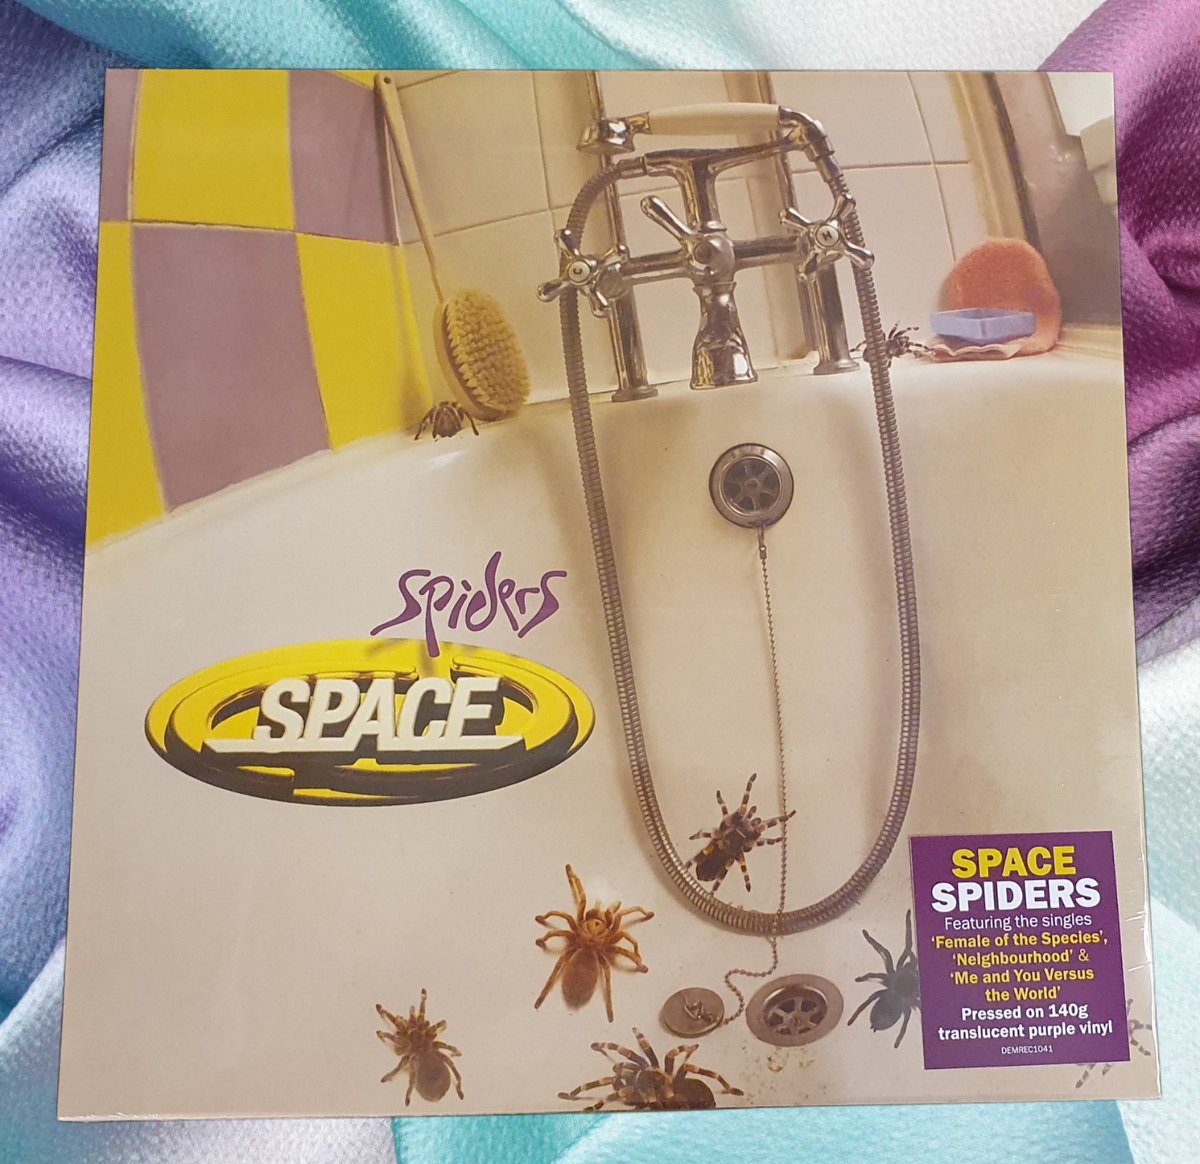 This week's pic for #reissueoftheweek  is this fantastic album from #spacetheband quite possibly THE album of 1996.

Now available on very limited purple vinyl!

Order yours in store now.

#vinylcollector #vinylrevival #recordstore